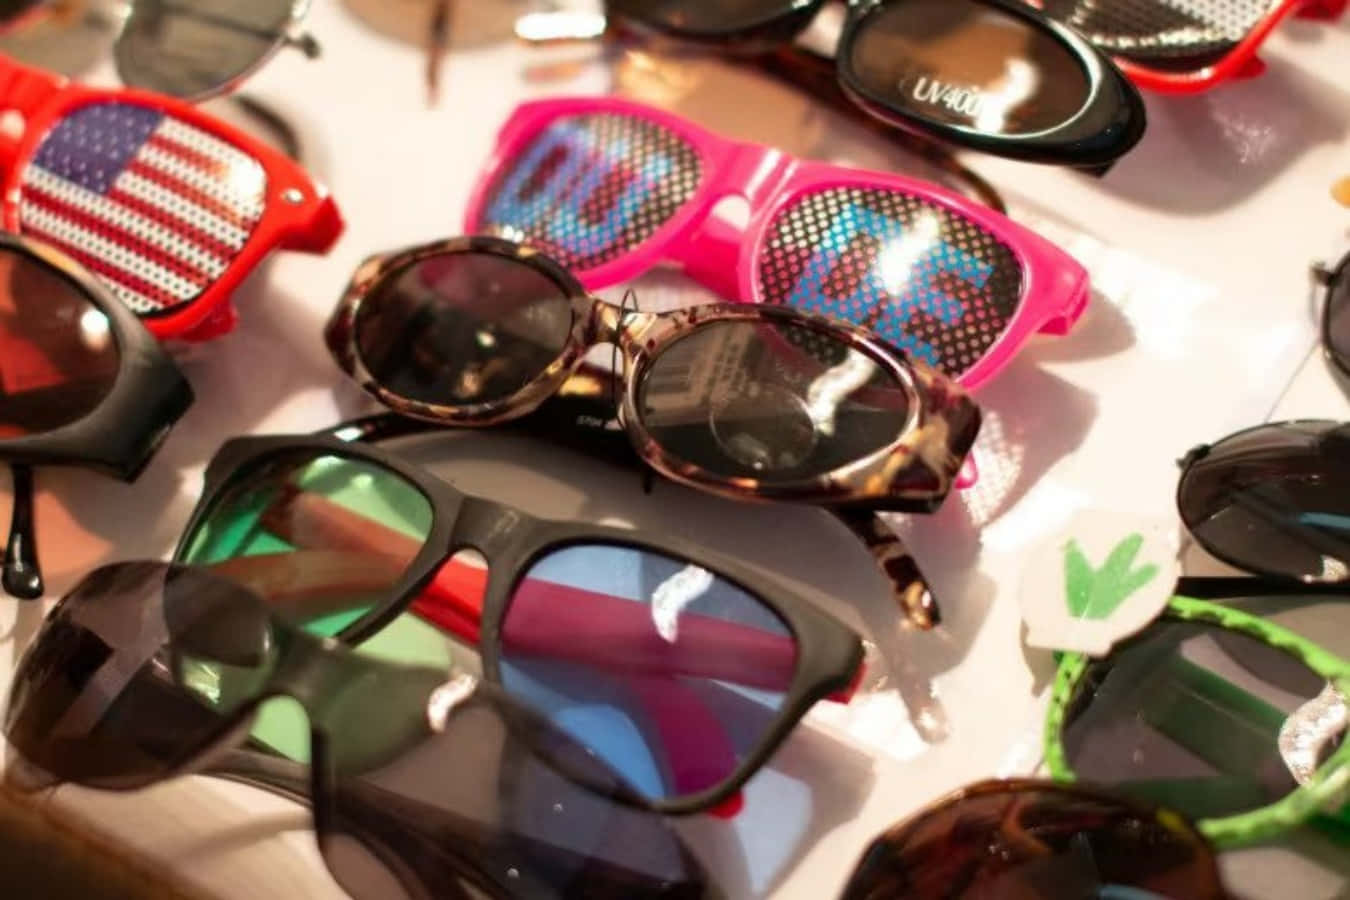 A Display Of Sunglasses With Different Designs